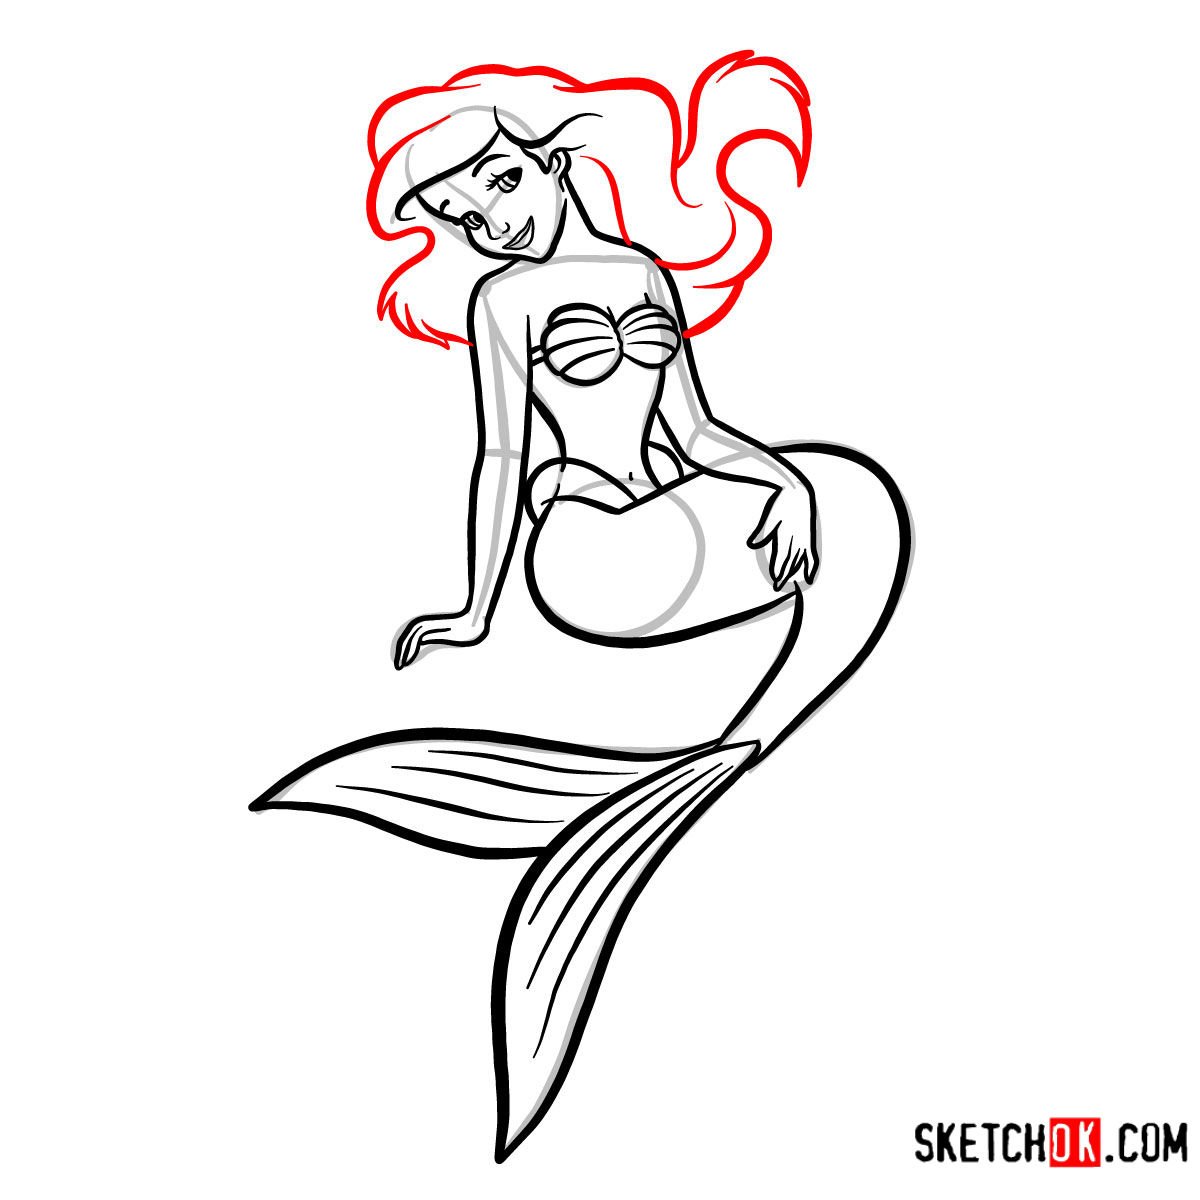 How to draw Ariel sitting on a stone | The Little Mermaid - step 09